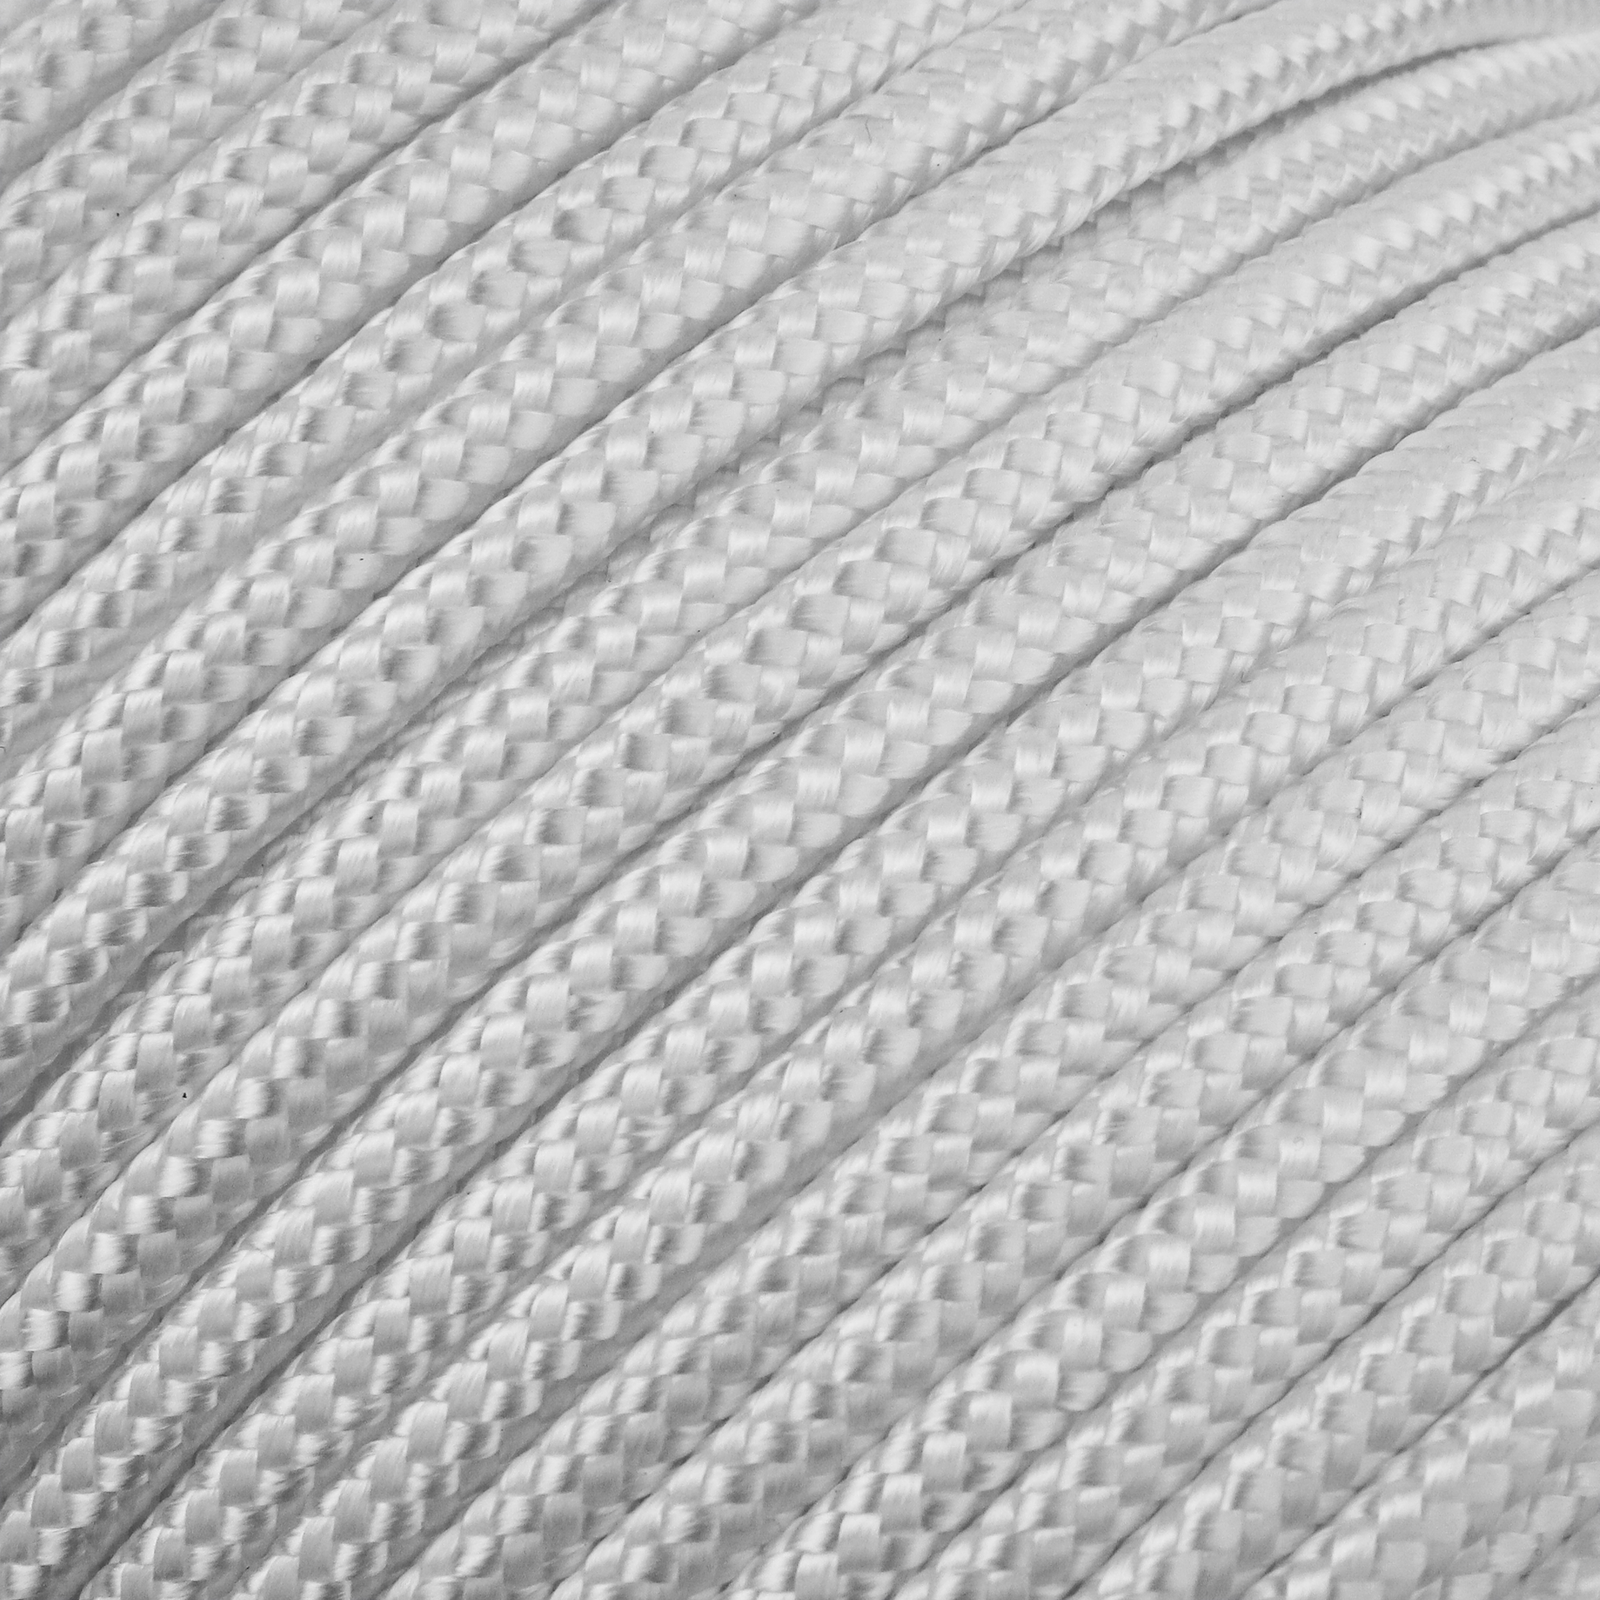 Braided polyester rope 100 m x 6 mm white